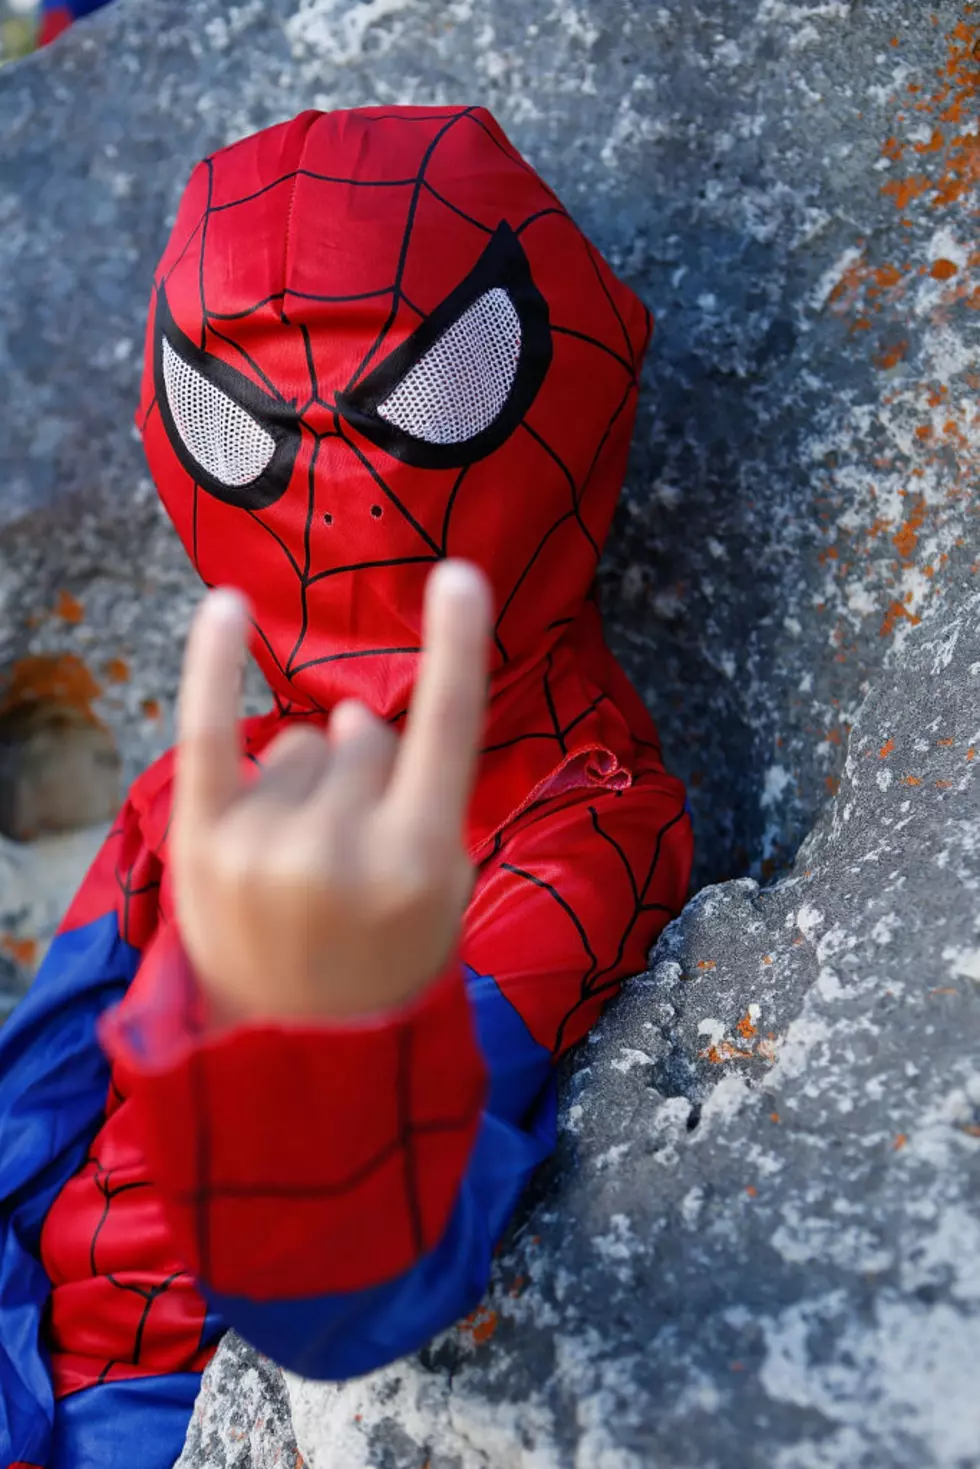 Ohio Burger King Robbed By Spiderman